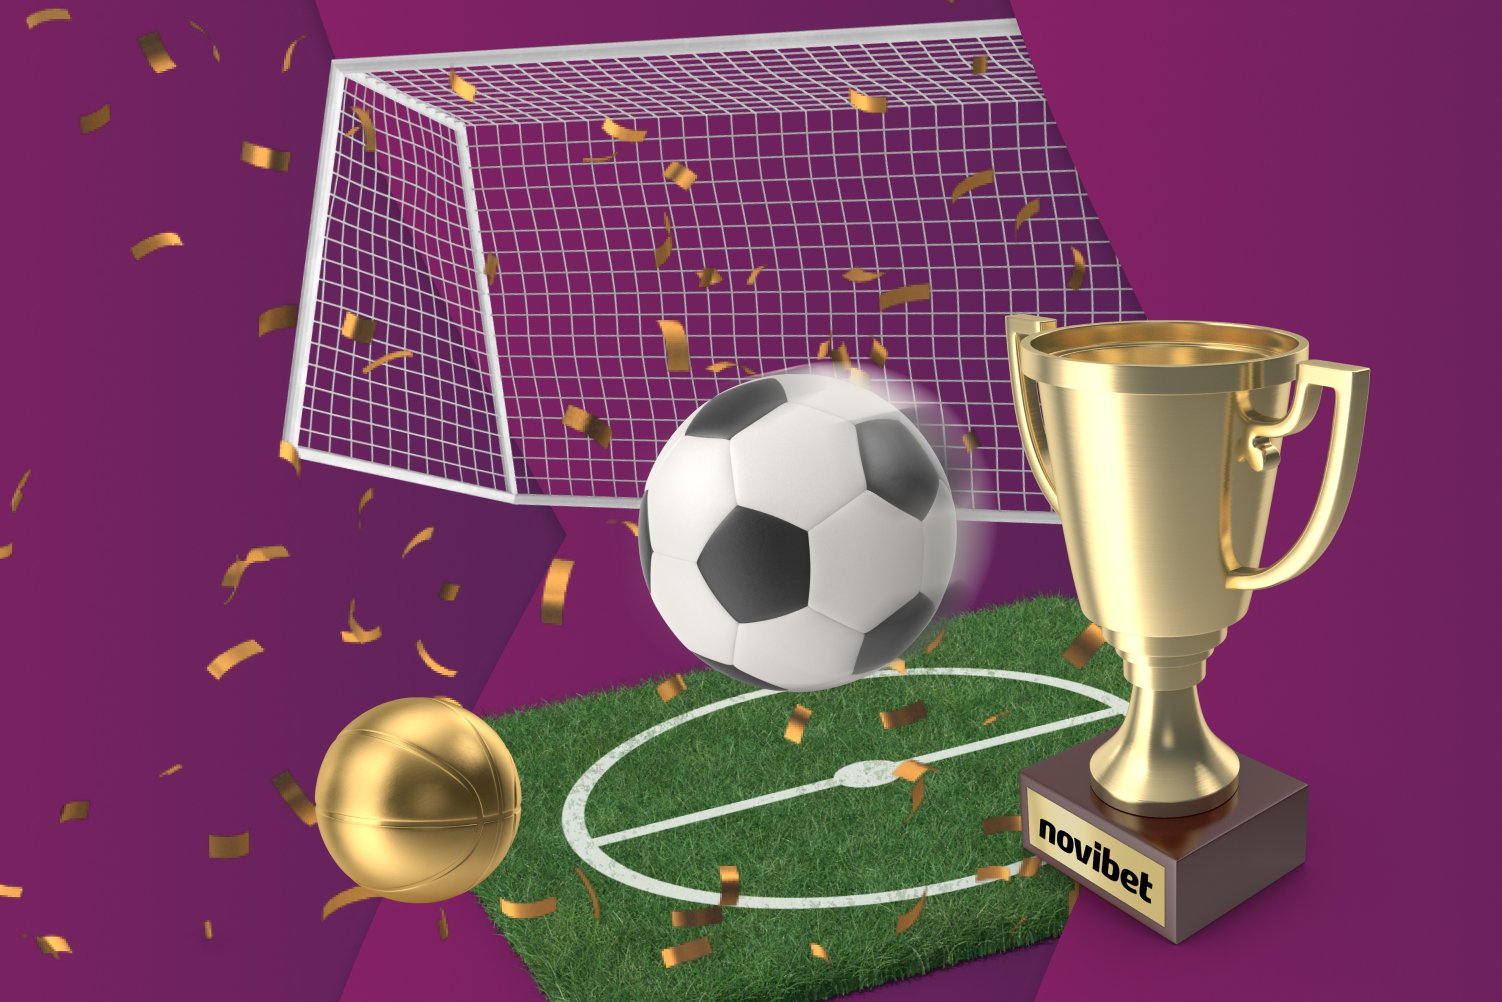 A golden football trophy on a purple background